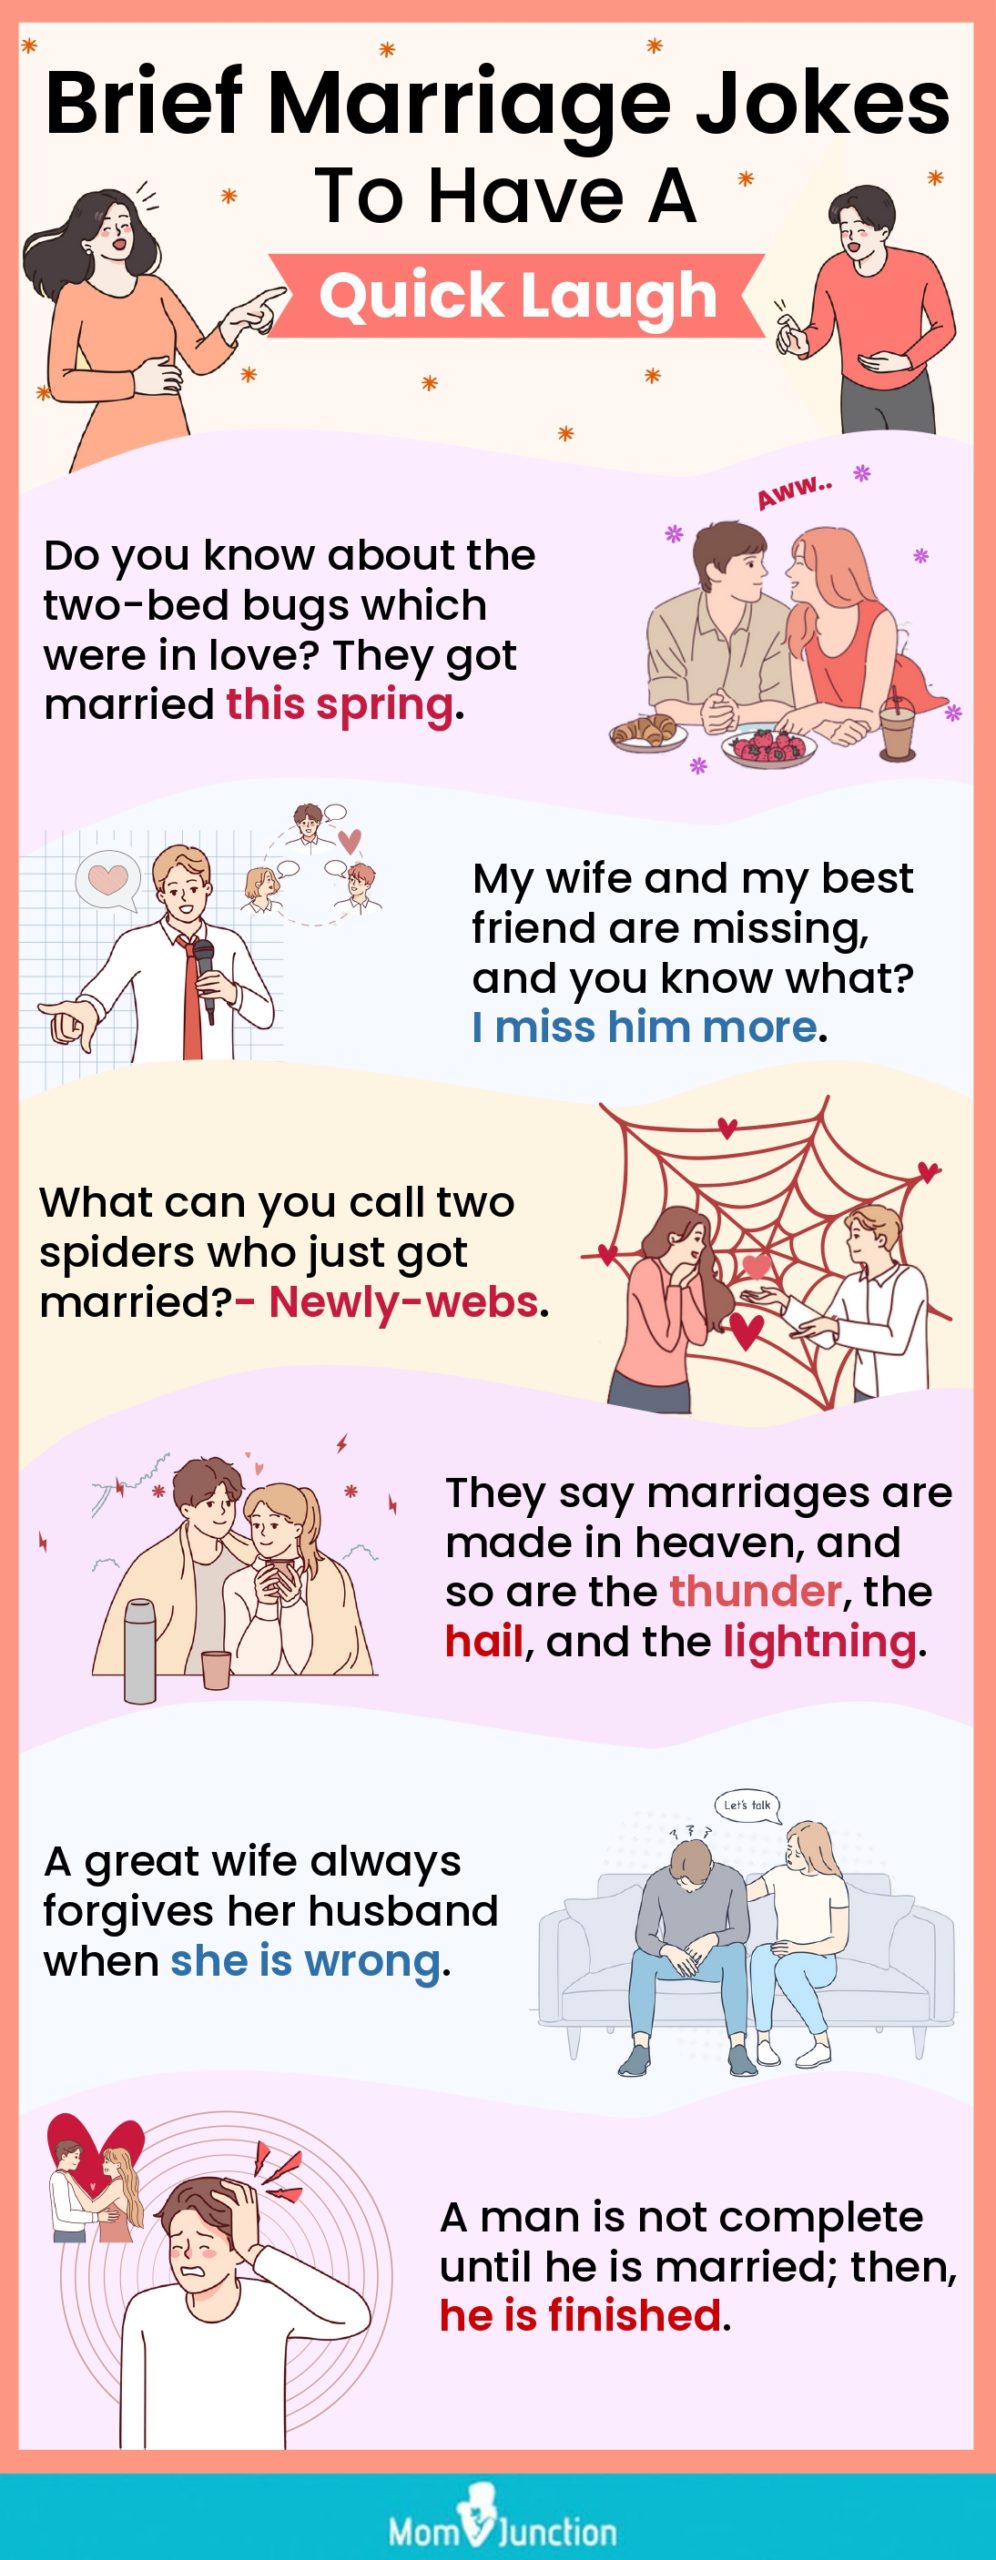 brief marriage jokes to have a quick laugh [infographic]